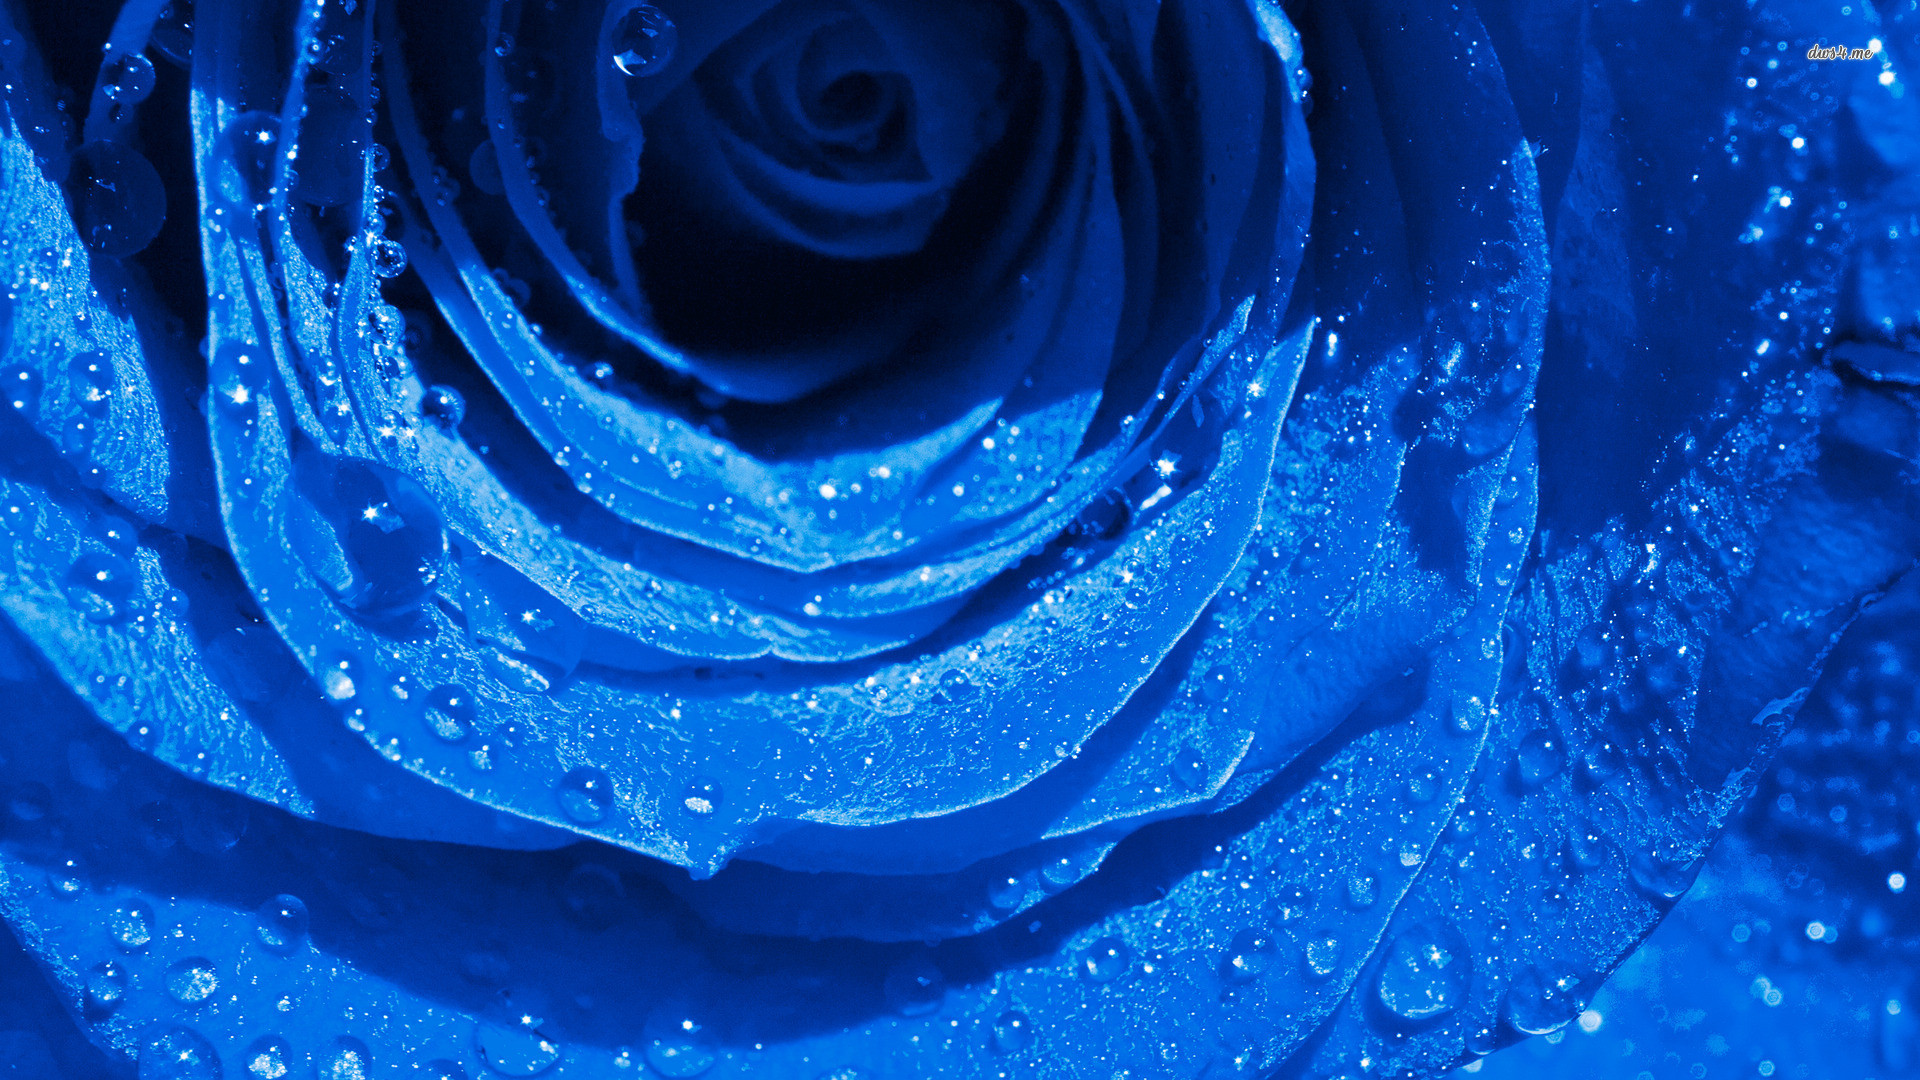 1920x1080 Wet Drops Blue Rose wallpapers (25 Wallpapers)